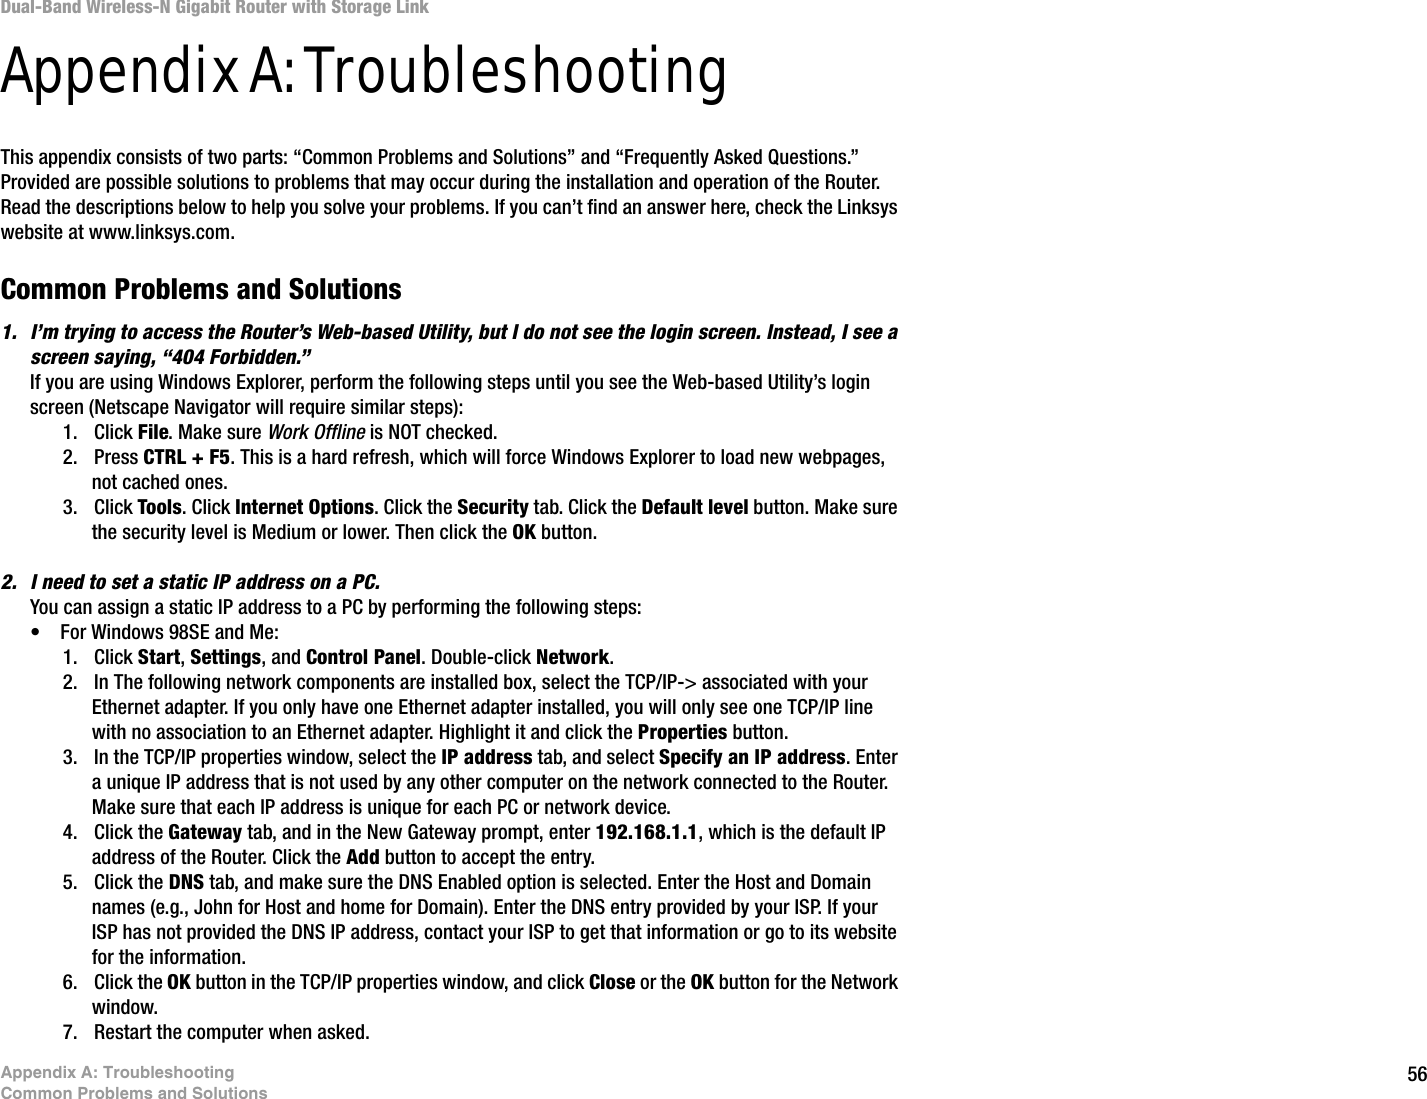 56Appendix A: TroubleshootingCommon Problems and SolutionsDual-Band Wireless-N Gigabit Router with Storage LinkAppendix A: TroubleshootingThis appendix consists of two parts: “Common Problems and Solutions” and “Frequently Asked Questions.” Provided are possible solutions to problems that may occur during the installation and operation of the Router. Read the descriptions below to help you solve your problems. If you can’t find an answer here, check the Linksys website at www.linksys.com.Common Problems and Solutions1. I’m trying to access the Router’s Web-based Utility, but I do not see the login screen. Instead, I see a screen saying, “404 Forbidden.”If you are using Windows Explorer, perform the following steps until you see the Web-based Utility’s login screen (Netscape Navigator will require similar steps):1. Click File. Make sure Work Offline is NOT checked.2. Press CTRL + F5. This is a hard refresh, which will force Windows Explorer to load new webpages, not cached ones.3. Click Tools. Click Internet Options. Click the Security tab. Click the Default level button. Make sure the security level is Medium or lower. Then click the OK button.2. I need to set a static IP address on a PC.You can assign a static IP address to a PC by performing the following steps:• For Windows 98SE and Me:1. Click Start, Settings, and Control Panel. Double-click Network.2. In The following network components are installed box, select the TCP/IP-&gt; associated with your Ethernet adapter. If you only have one Ethernet adapter installed, you will only see one TCP/IP line with no association to an Ethernet adapter. Highlight it and click the Properties button.3. In the TCP/IP properties window, select the IP address tab, and select Specify an IP address. Enter a unique IP address that is not used by any other computer on the network connected to the Router. Make sure that each IP address is unique for each PC or network device.4. Click the Gateway tab, and in the New Gateway prompt, enter 192.168.1.1, which is the default IP address of the Router. Click the Add button to accept the entry.5. Click the DNS tab, and make sure the DNS Enabled option is selected. Enter the Host and Domain names (e.g., John for Host and home for Domain). Enter the DNS entry provided by your ISP. If your ISP has not provided the DNS IP address, contact your ISP to get that information or go to its website for the information.6. Click the OK button in the TCP/IP properties window, and click Close or the OK button for the Network window.7. Restart the computer when asked.